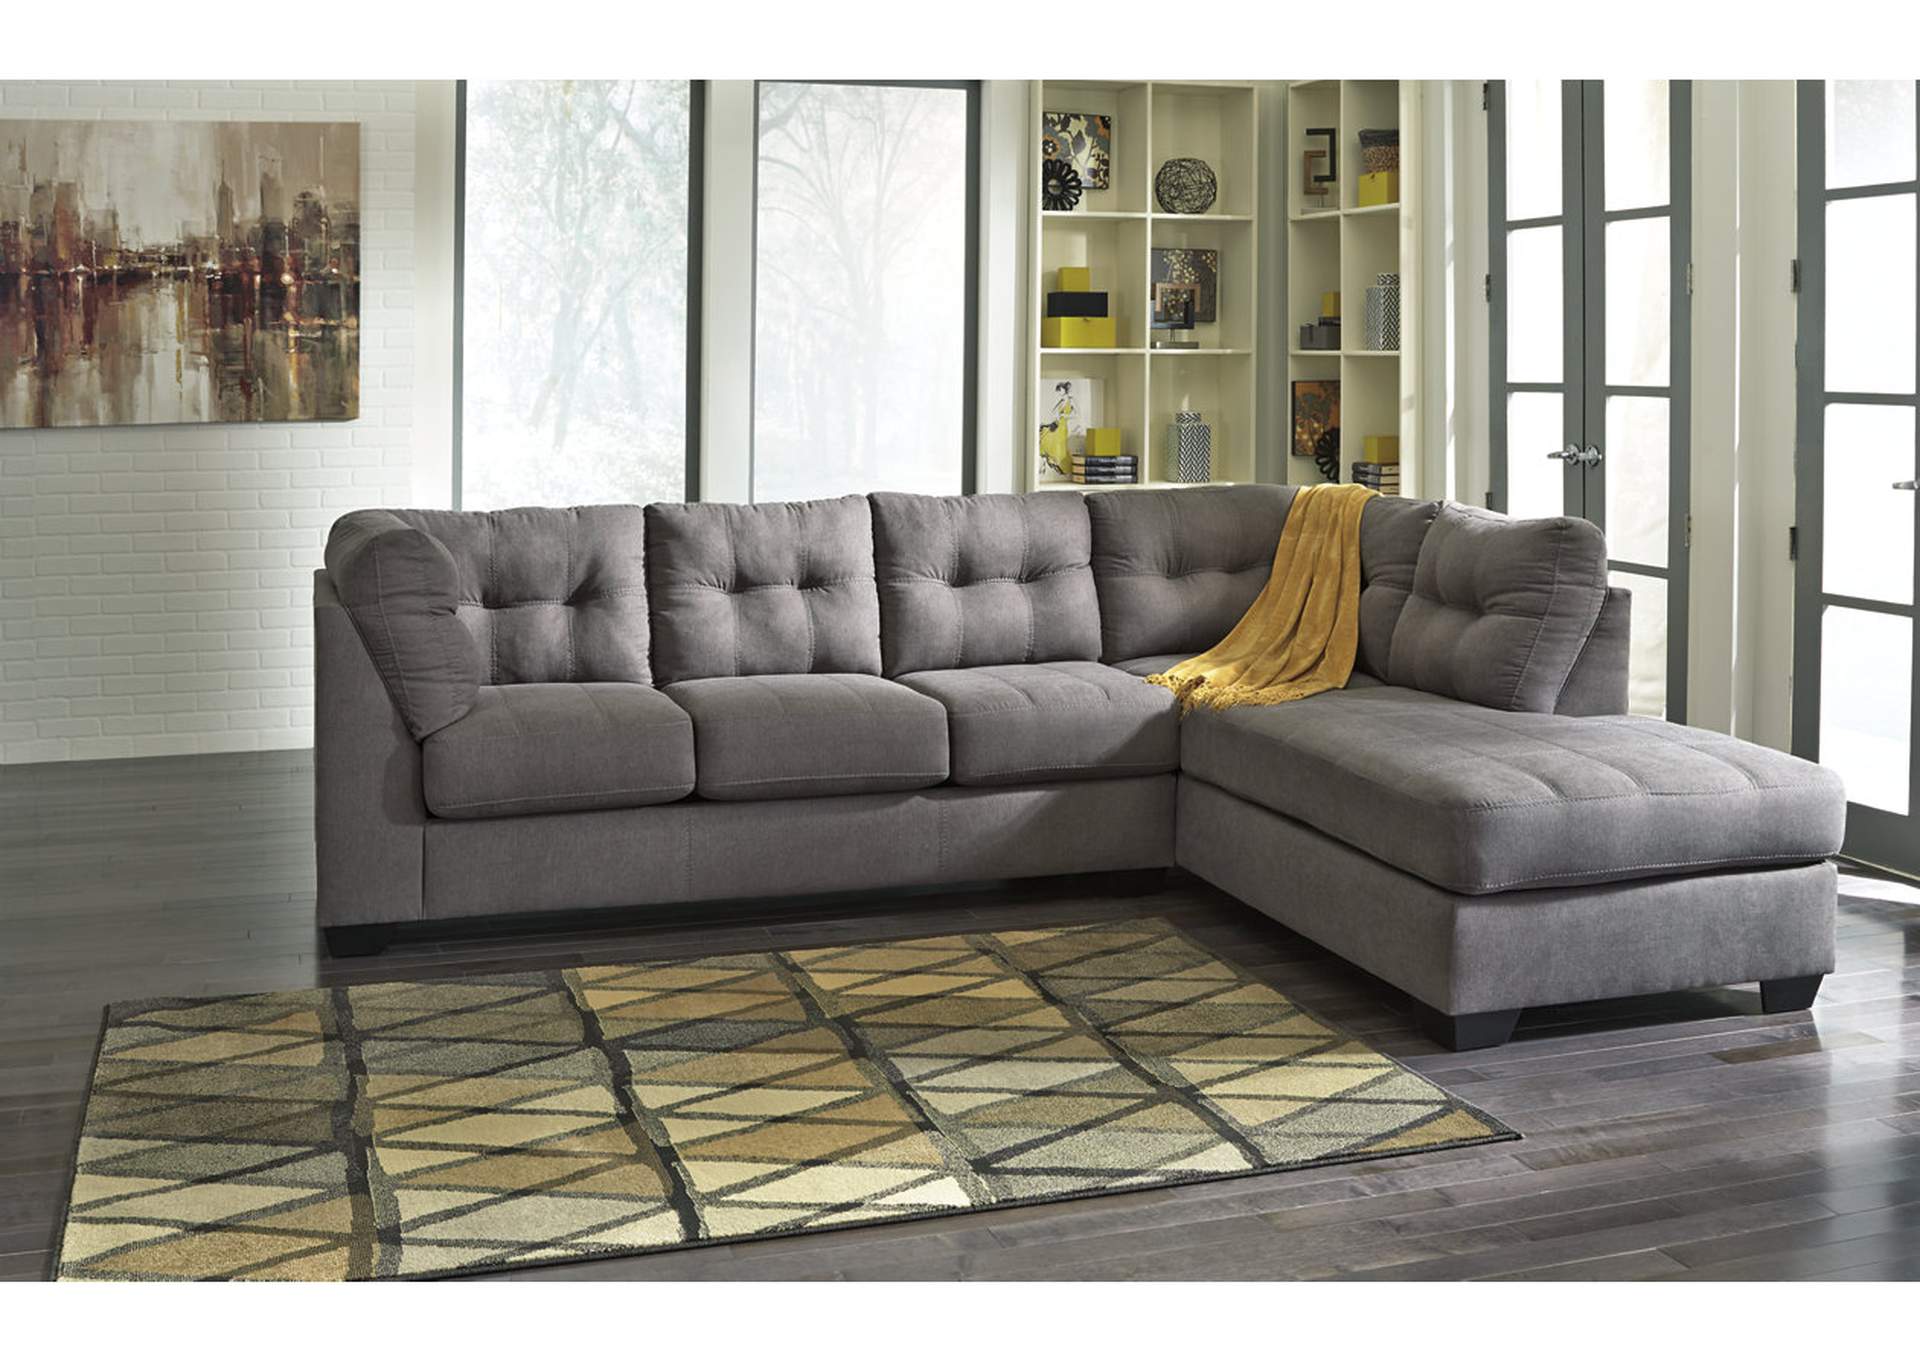 Maier 2-Piece Sectional with Chaise,Benchcraft